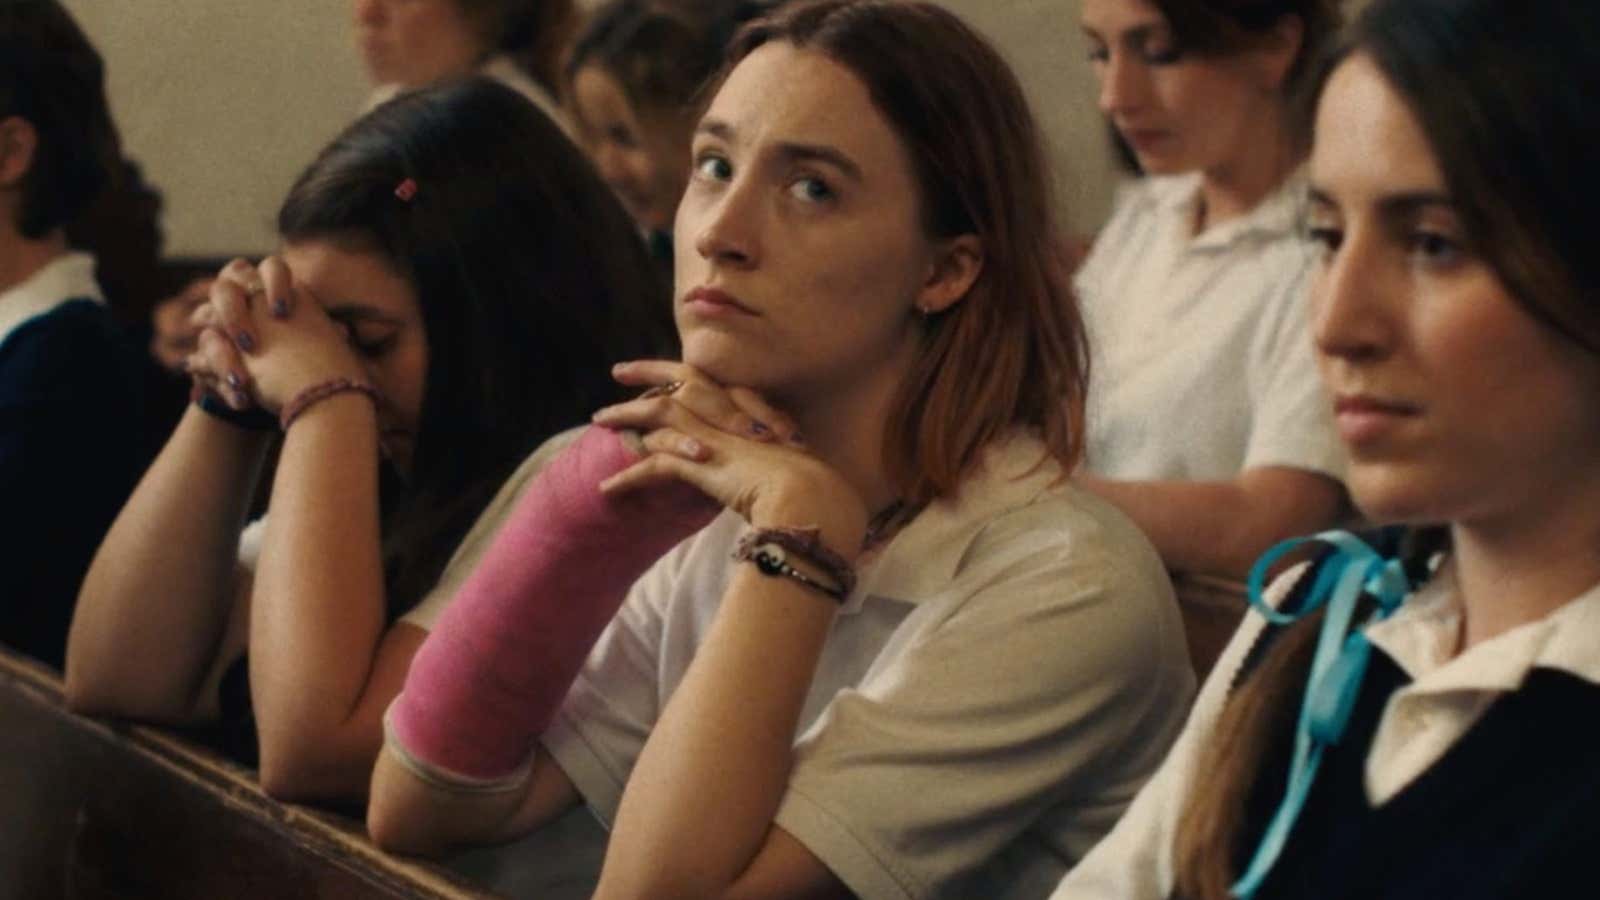 The Best Fanny Packs and One From Lady Bird's Greta Gerwig